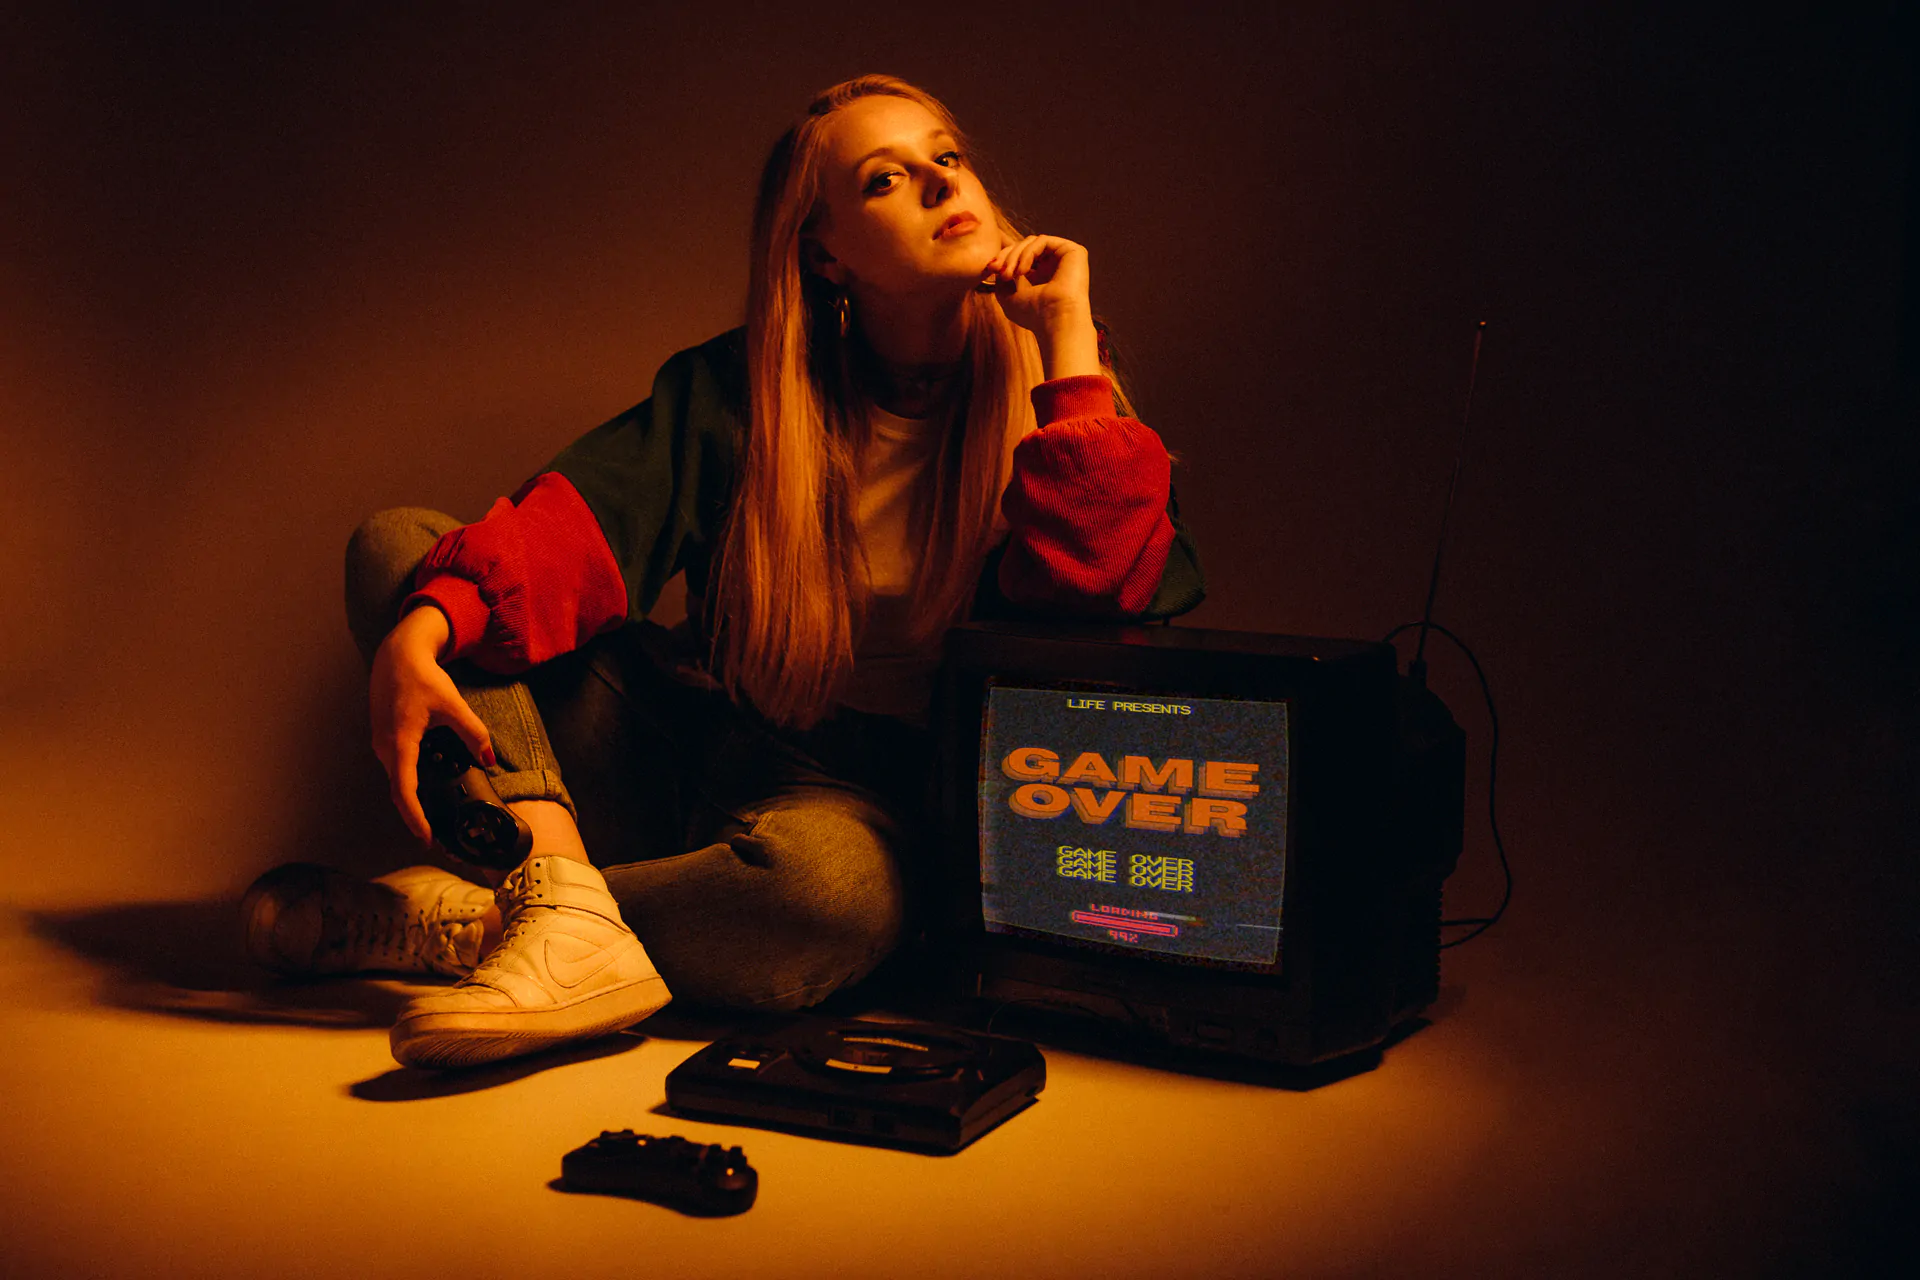 Irish alt-pop songwriter REBEKAH FITCH creates playable video game for new single ‘Game Over’